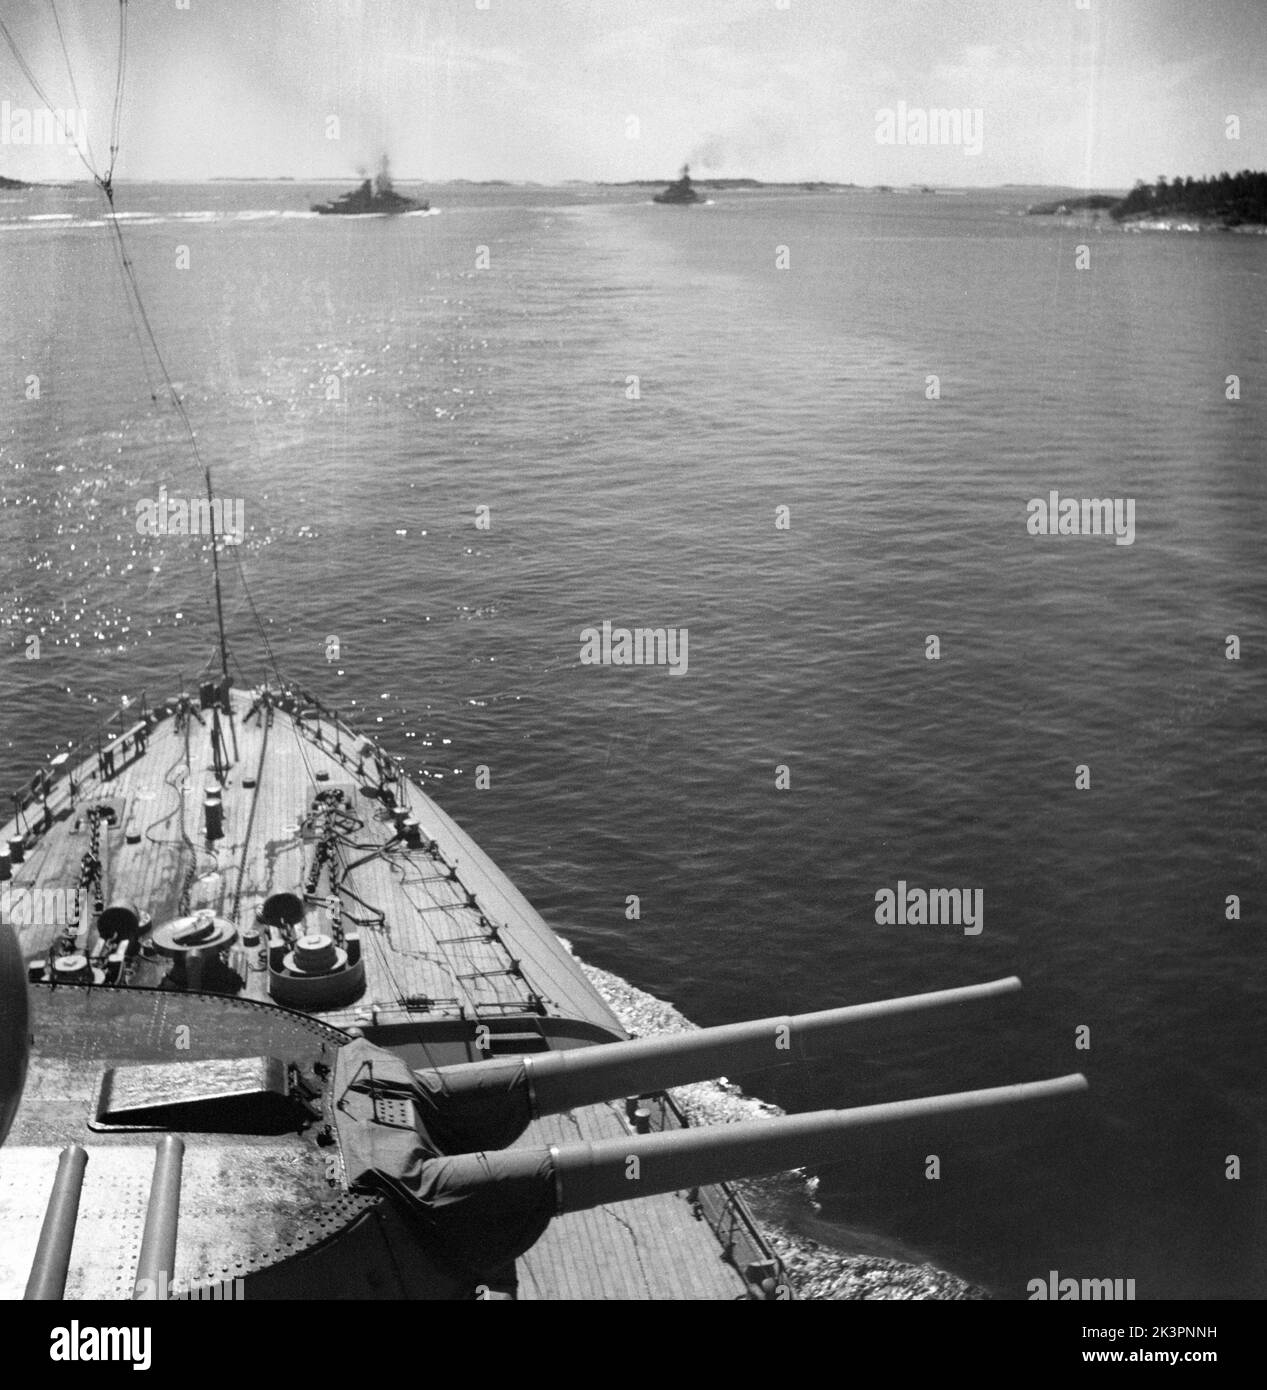 During World war II. The war ship Sverige during navy exercises at sea. The front cannons are visible with a swedish warships cruising on the side. Sweden june 1940. Kristoffersson ref 141 Stock Photo